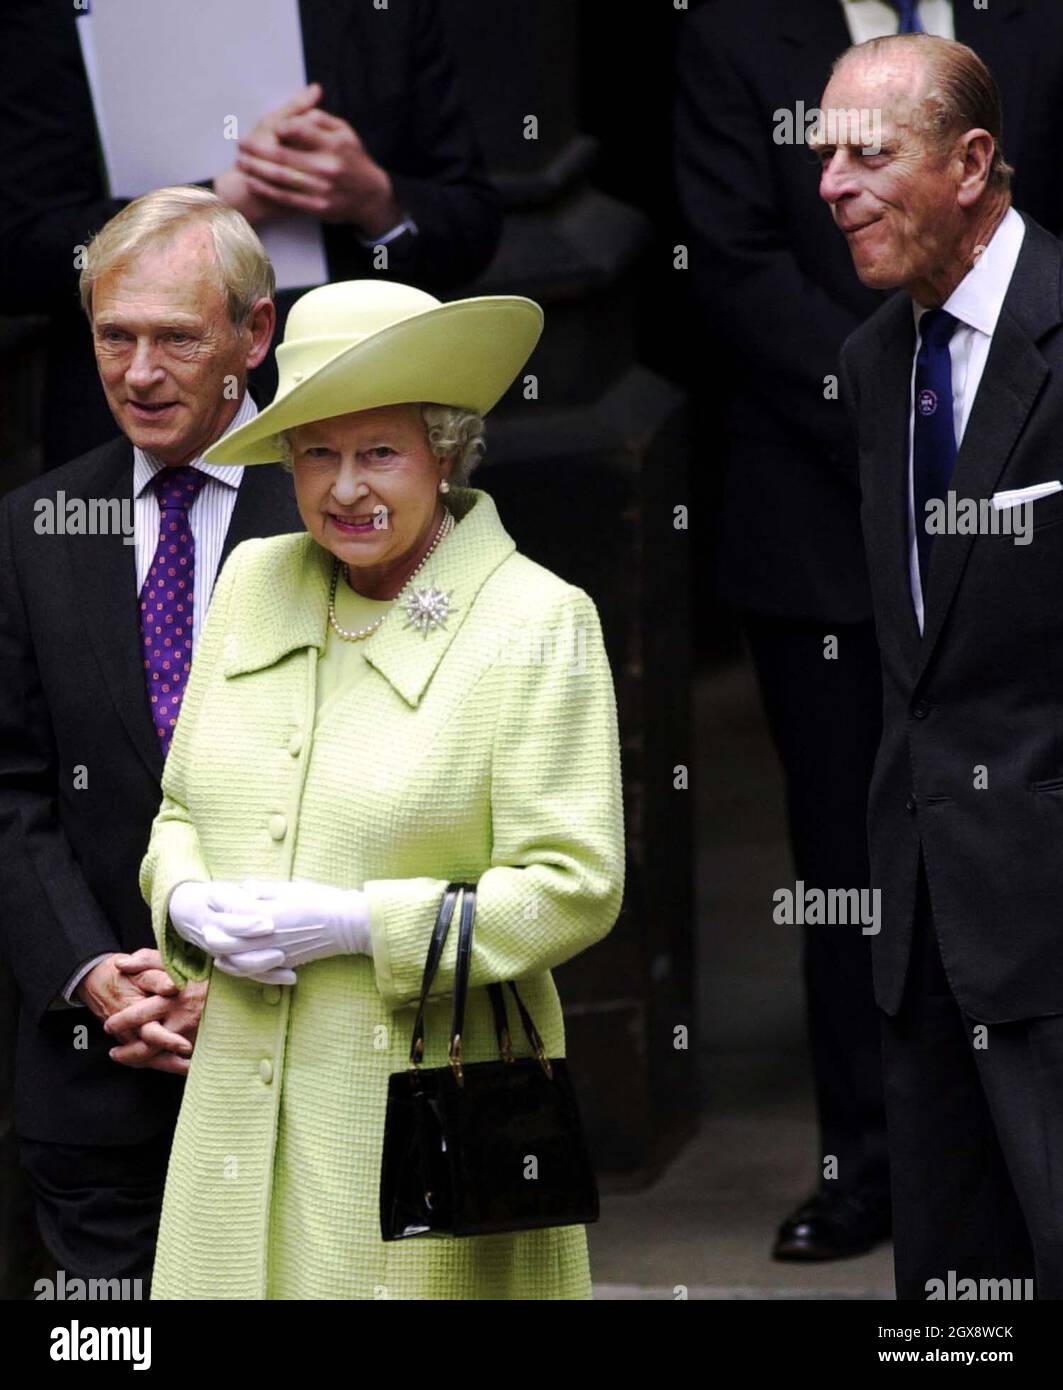 The Queen and Duke of Edinburgh, accompanied by the Presiding Officer George Reid,  at the Scottish Parliament in Edinburgh, where she was meeting party leaders. Half length, Royals, green hat  Stock Photo